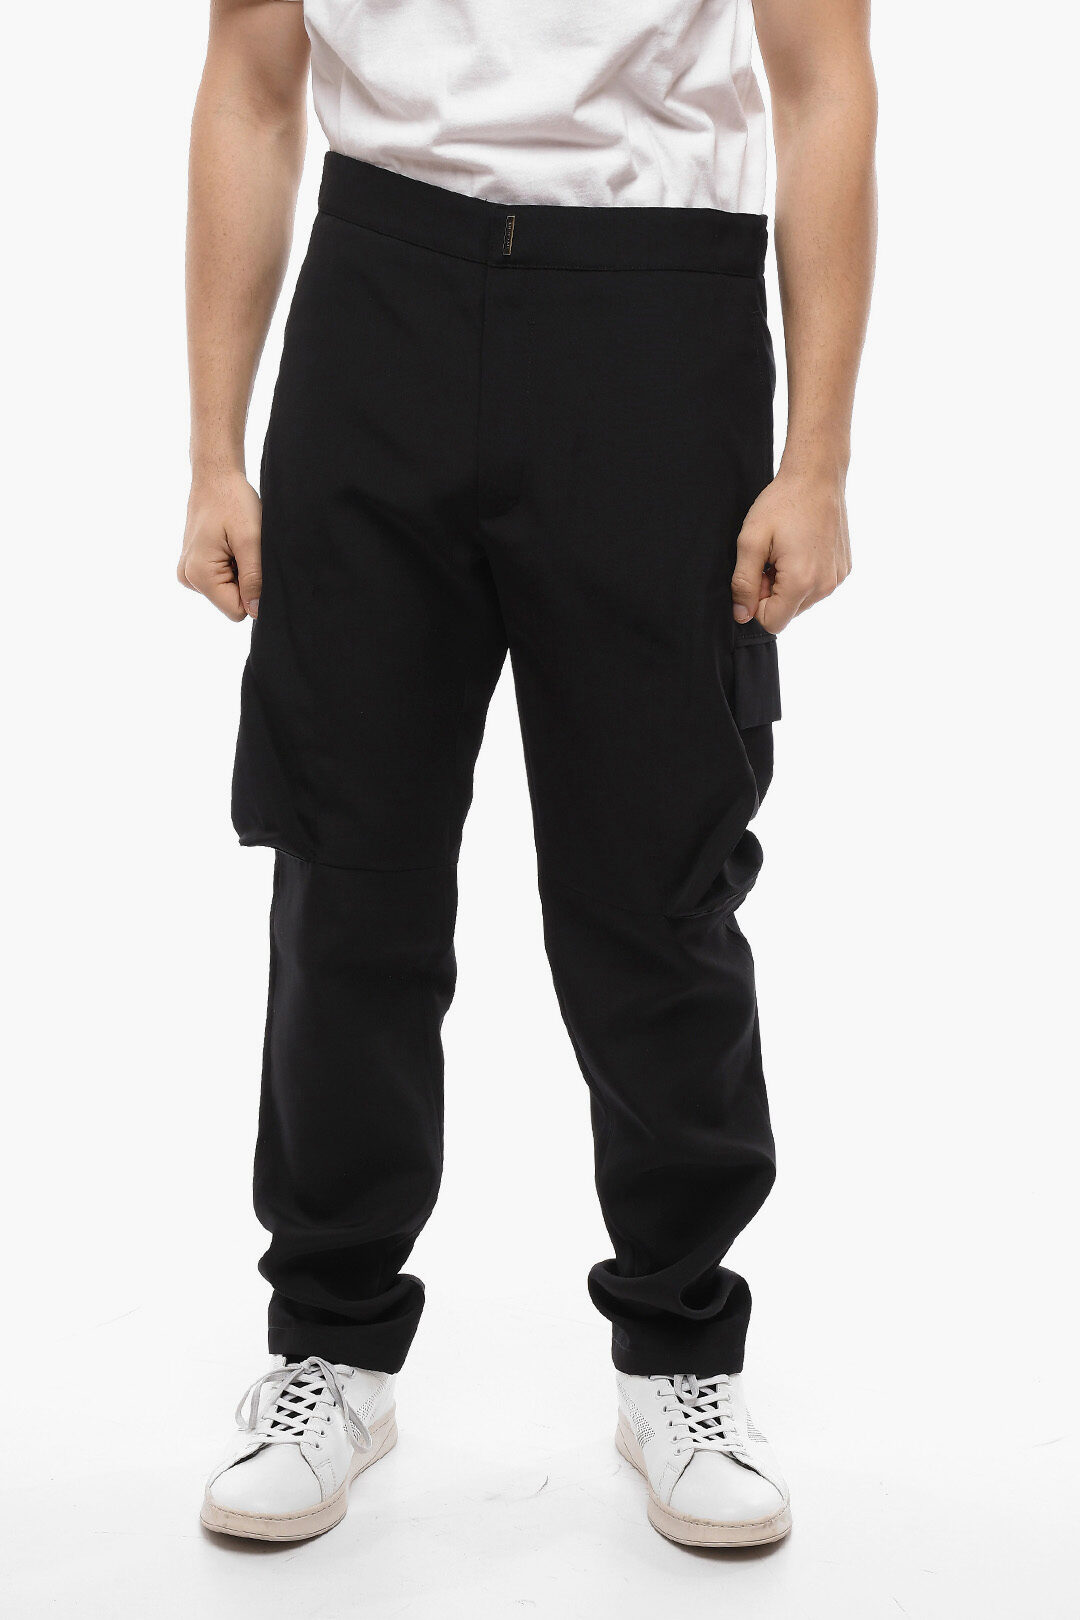 Givenchy Slim Fit Wool Cargo Pants men - Glamood Outlet